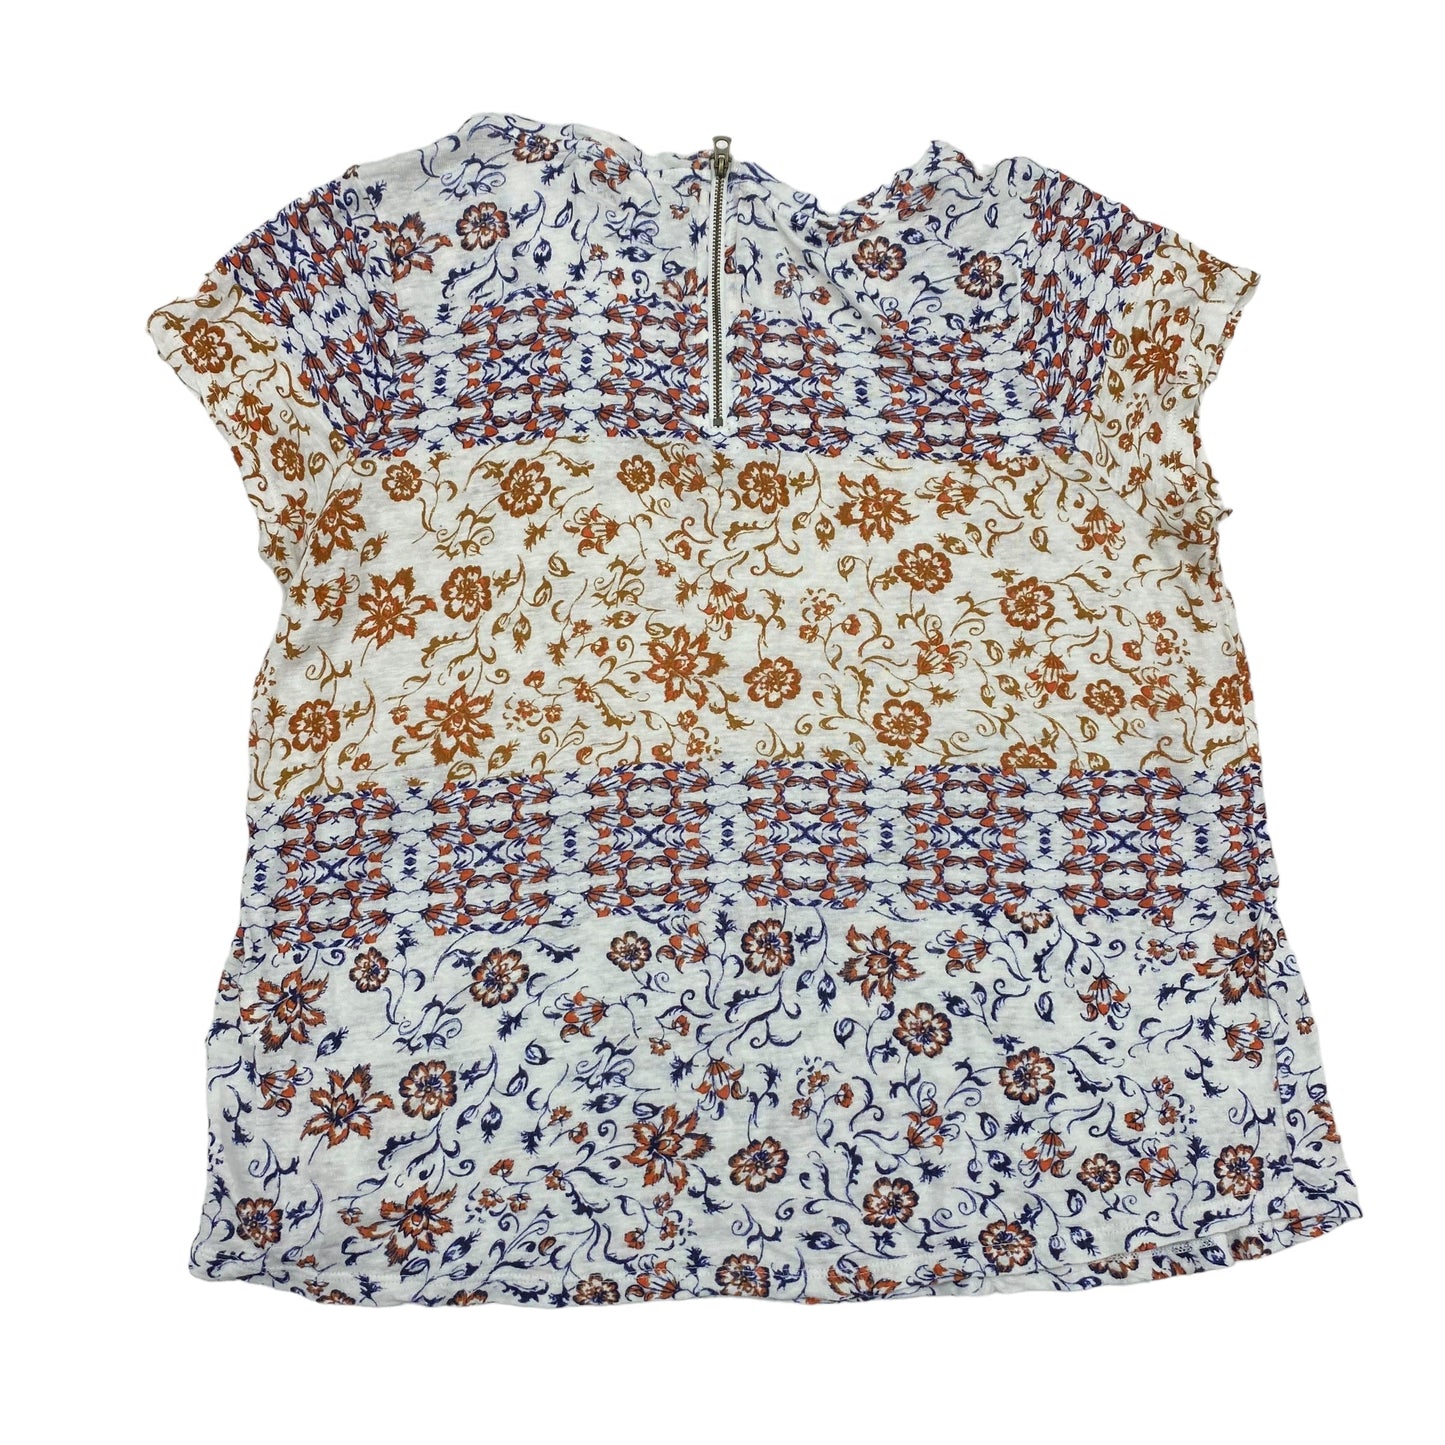 FLORAL PRINT LUCKY BRAND TOP SS, Size 1X